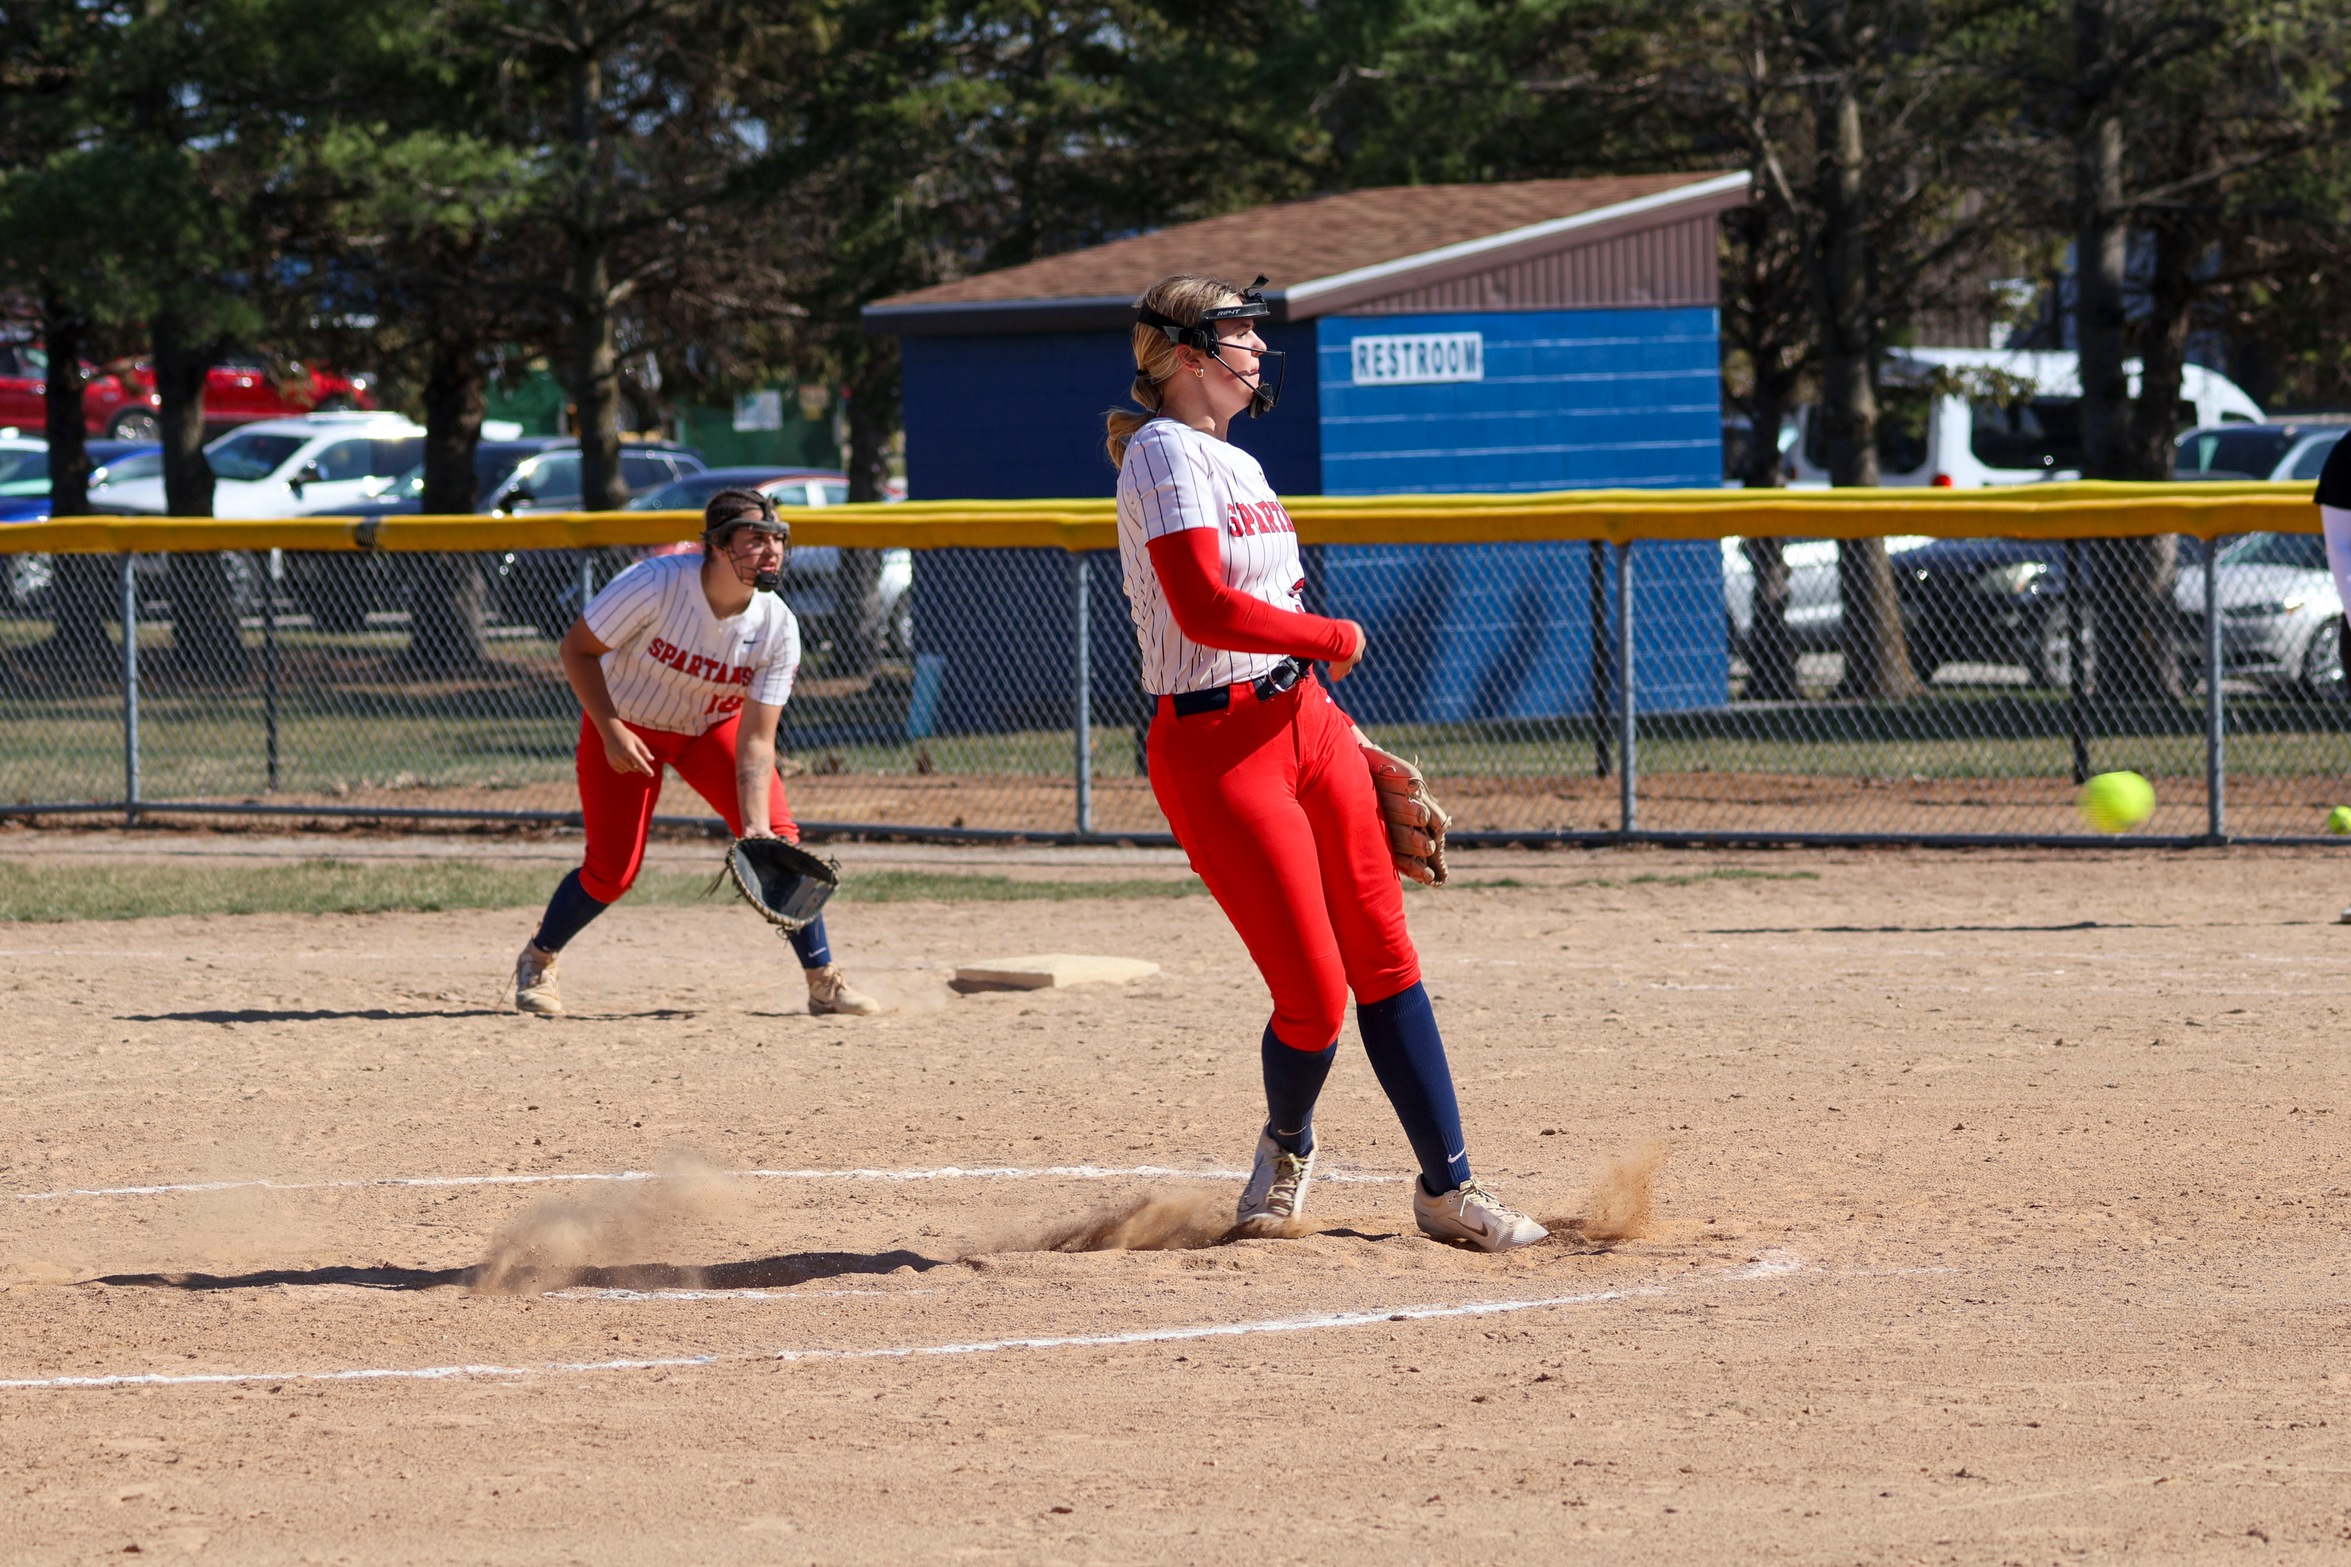 SOUTHWESTERN COMMUNITY COLLEGE SOFTBALL DOMINATES MARSHALLTOWN WITH BACK-TO-BACK VICTORIES